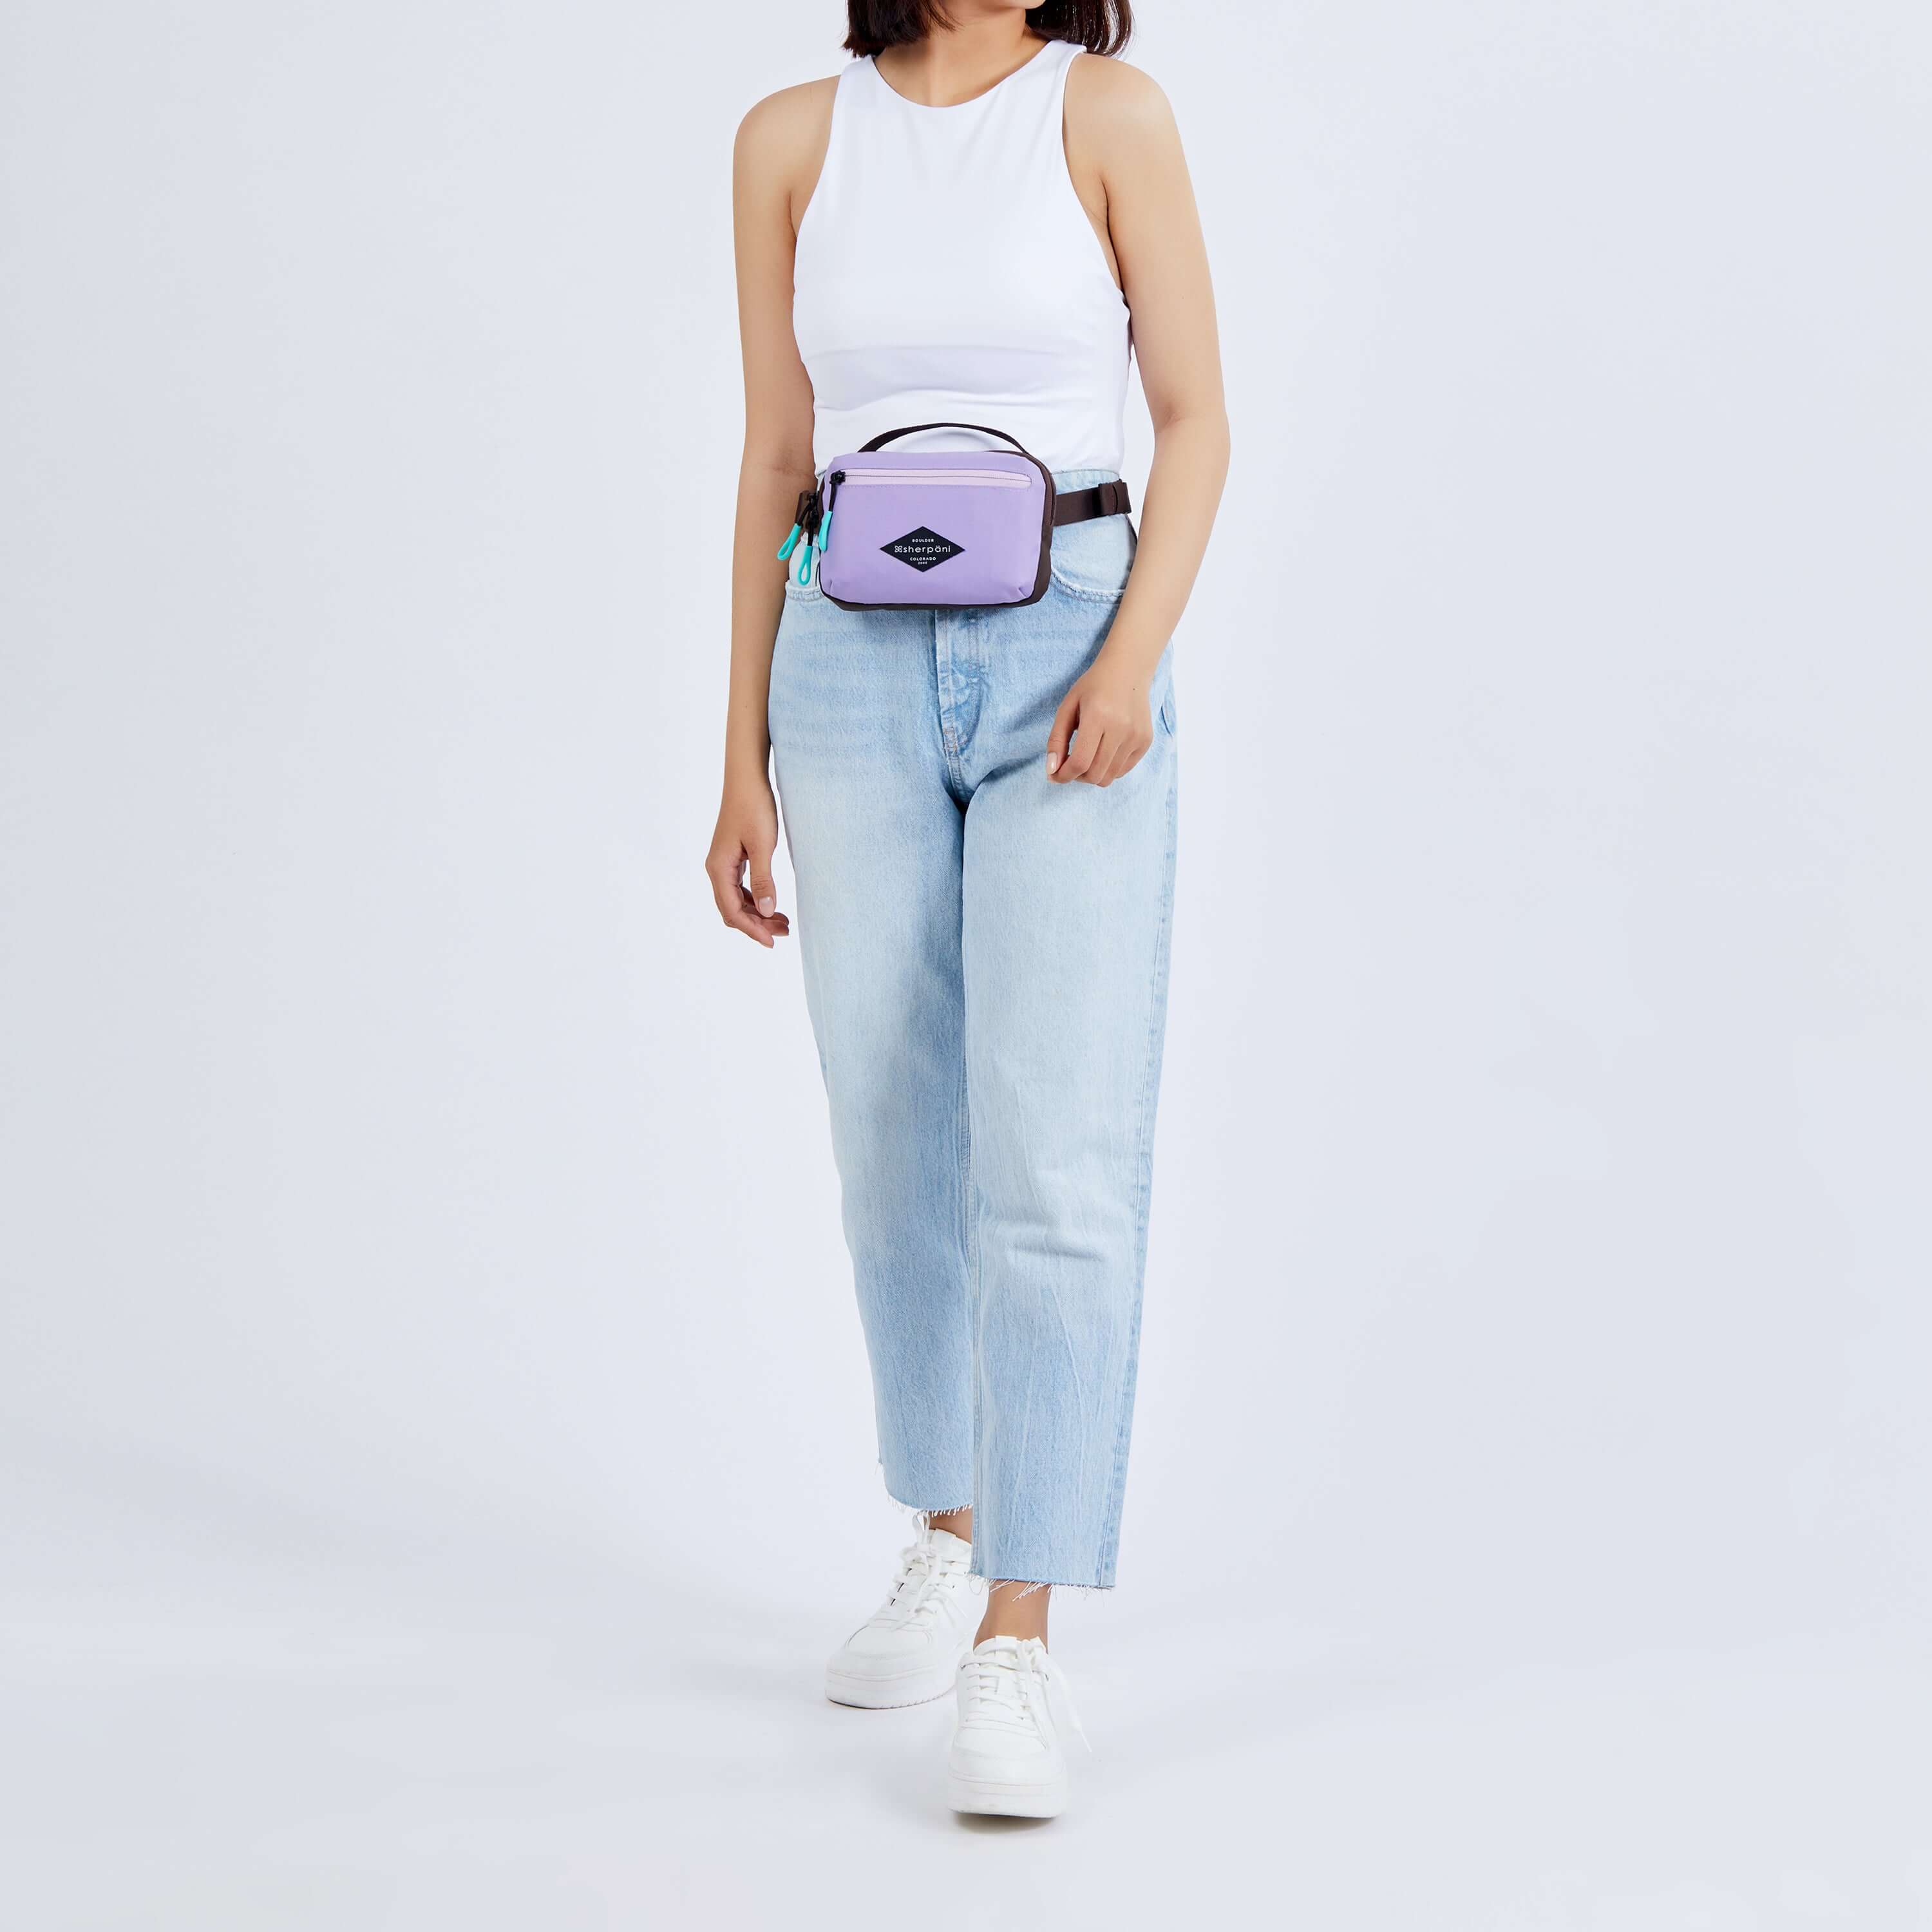 Close up view of a dark haired model. She is wearing a white tank top, jeans, white sneakers, and Sherpani&#39;s fanny pack, the Hyk in Lavender, as a fanny pack.